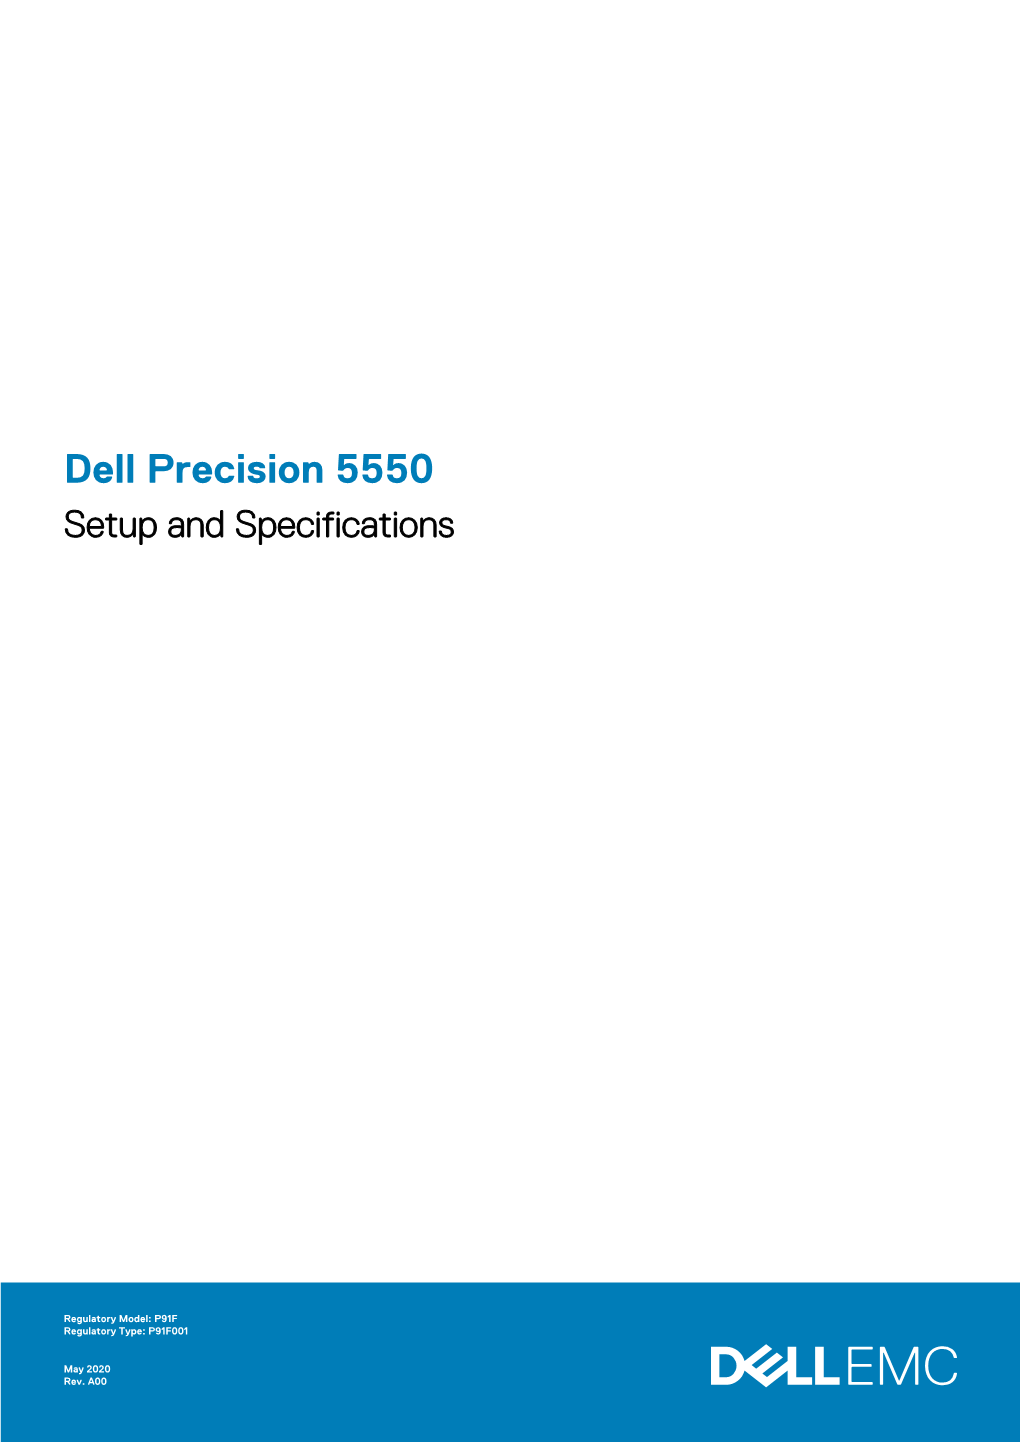 Dell Precision 5550 Setup and Specifications